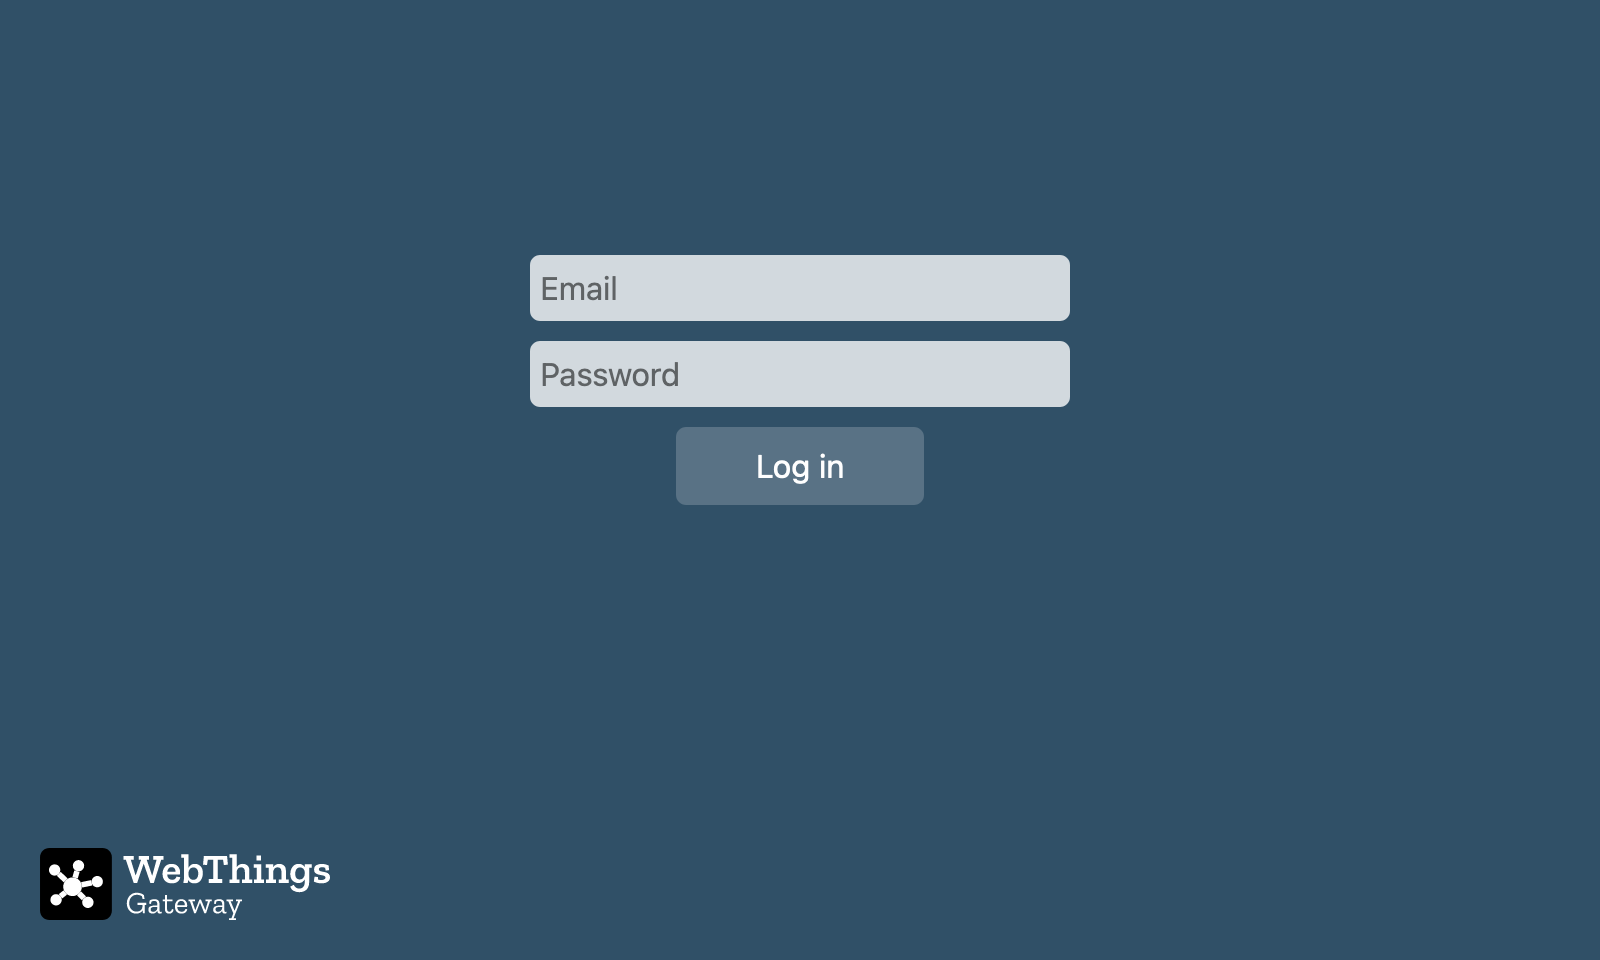 Screenshot of the login form with  email and password text fields and a log in button